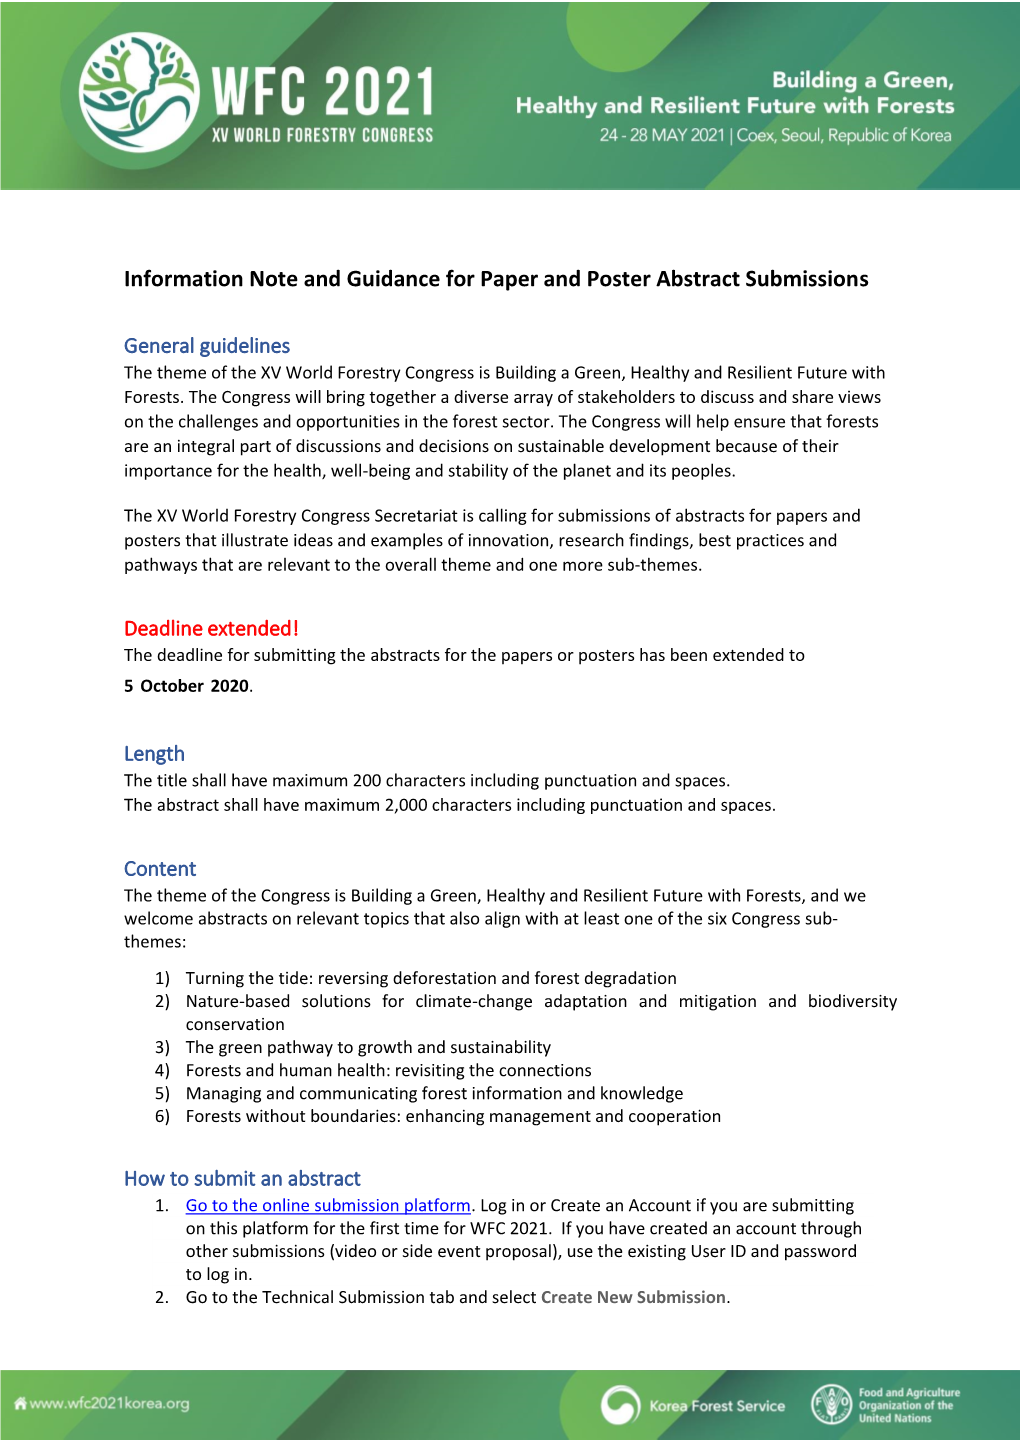 Information Note and Guidance for Paper and Poster Abstract Submissions